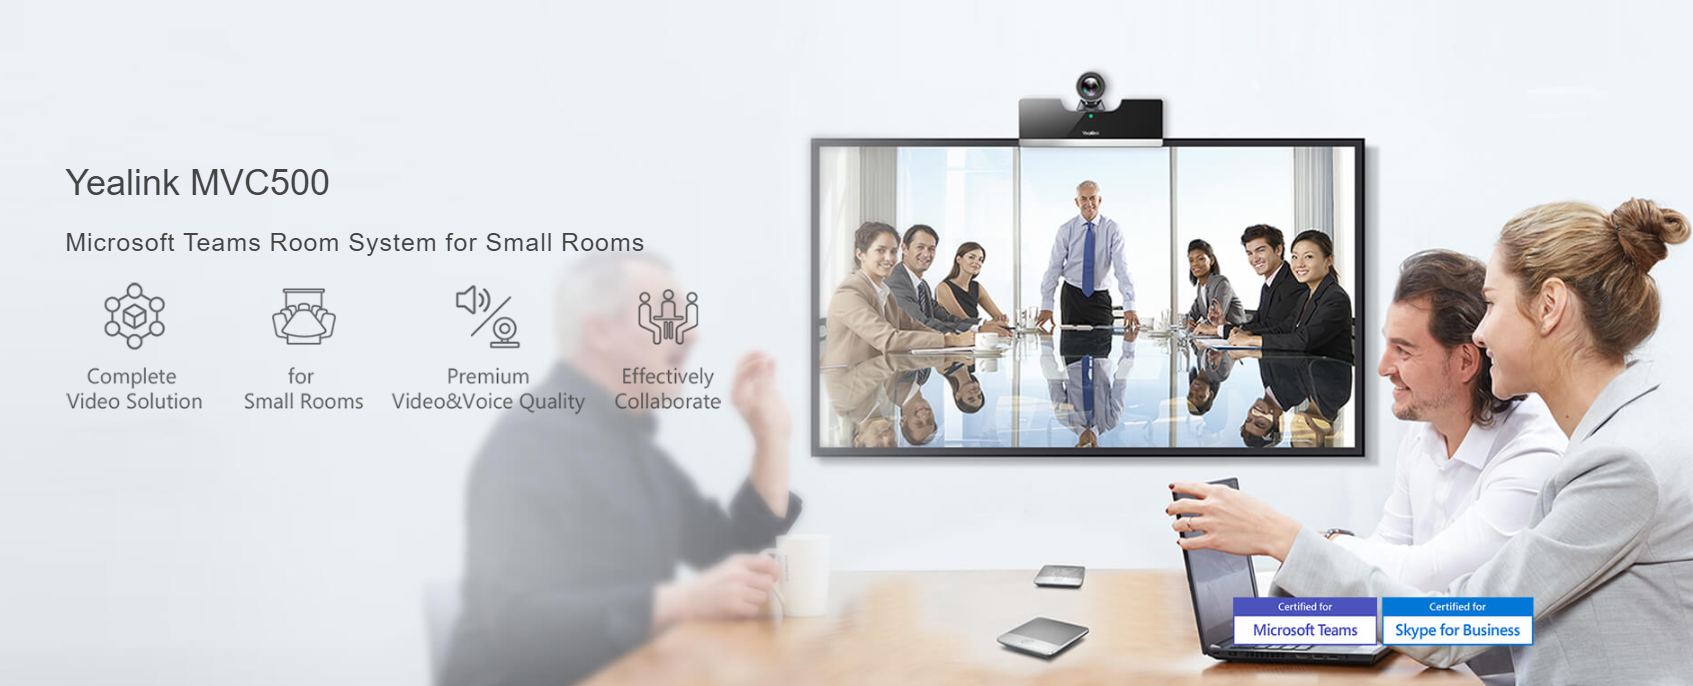 Yealink MVC500 Room System Video solution for Microsoft Teams and Skype for Business - Hong Kong - Sales Hotline 39001988